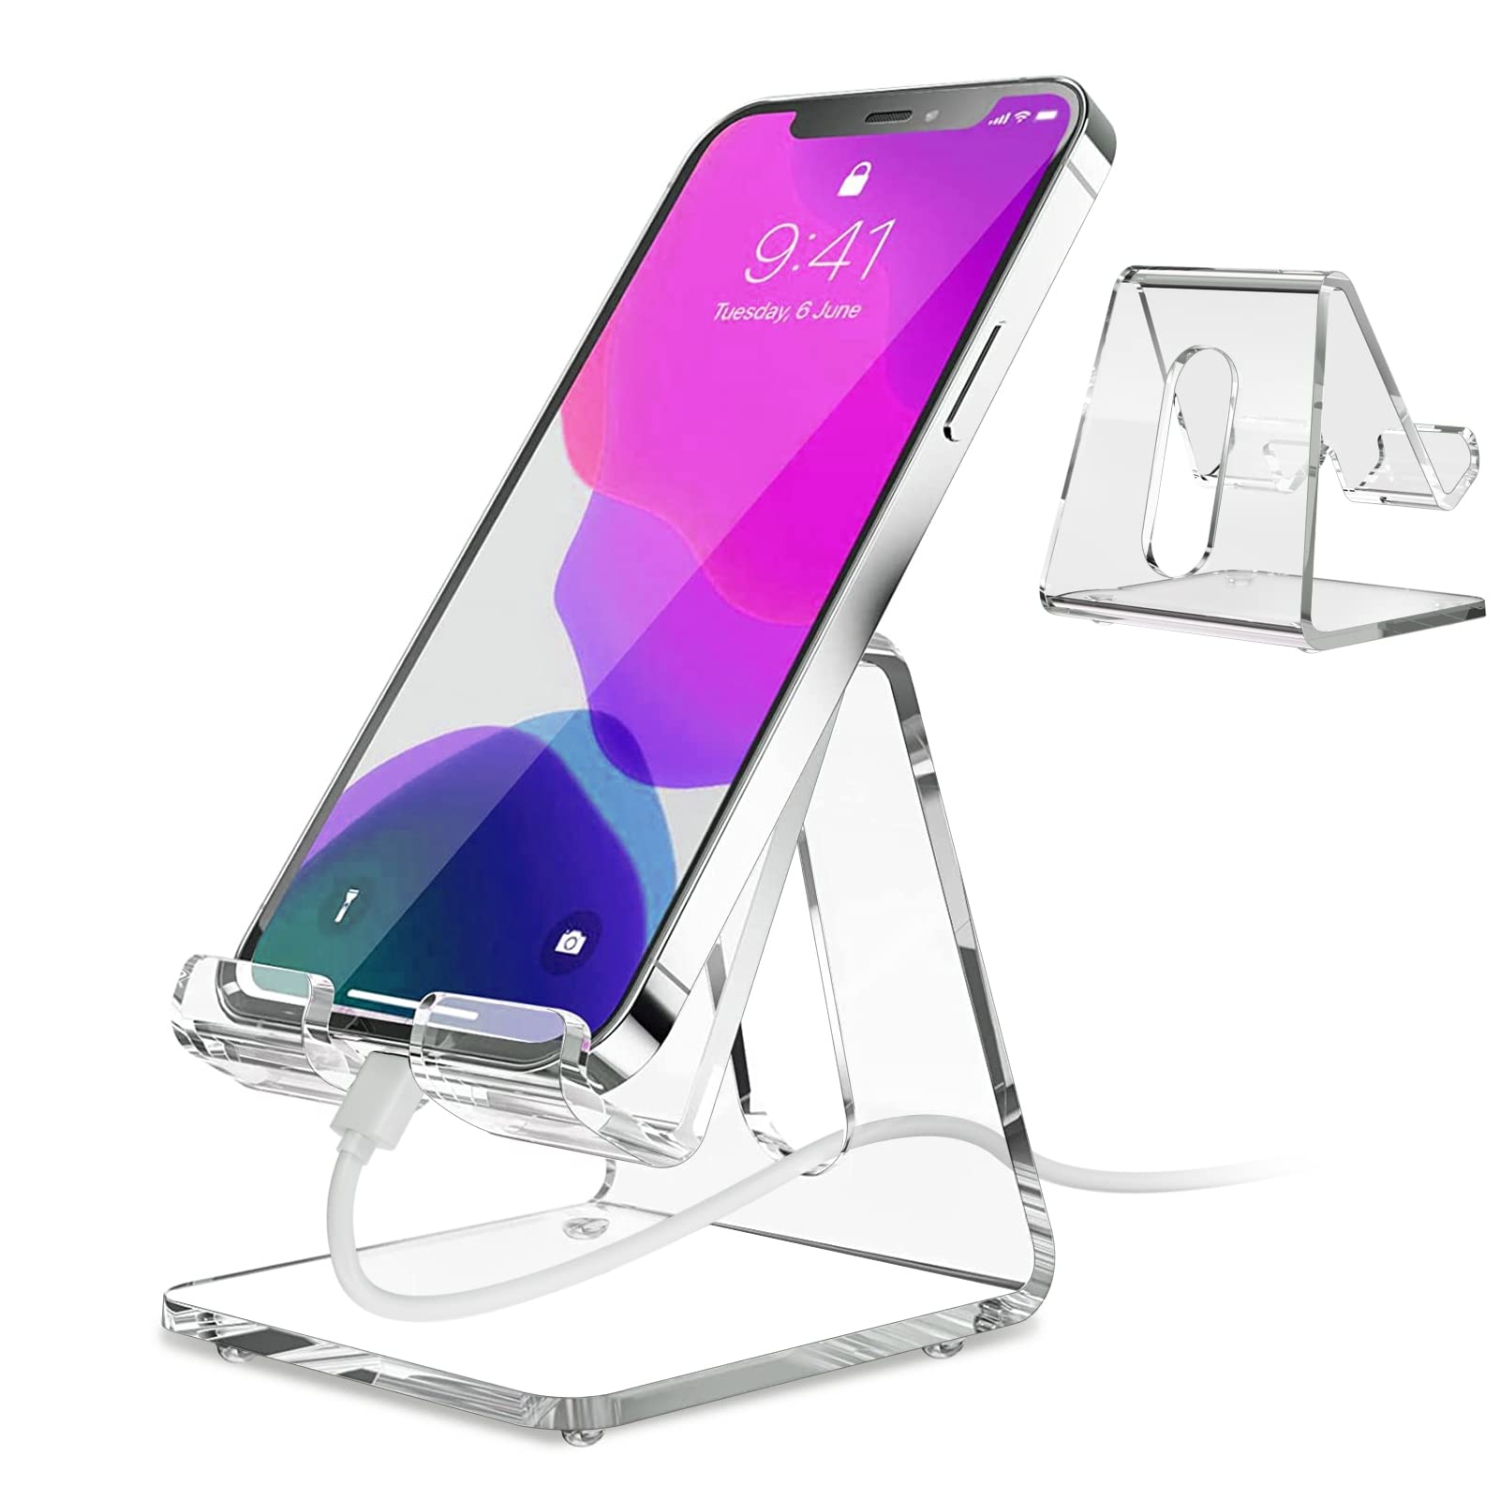 Acrylic Cell Phone Stand for Desk, Phone Holder, Dock, Cradle Compatible with iPhone 13 Pro Max 11 12 XR 7 8 Plus, Samsung Galaxy, Smartphone, Desk Accessories, Clear